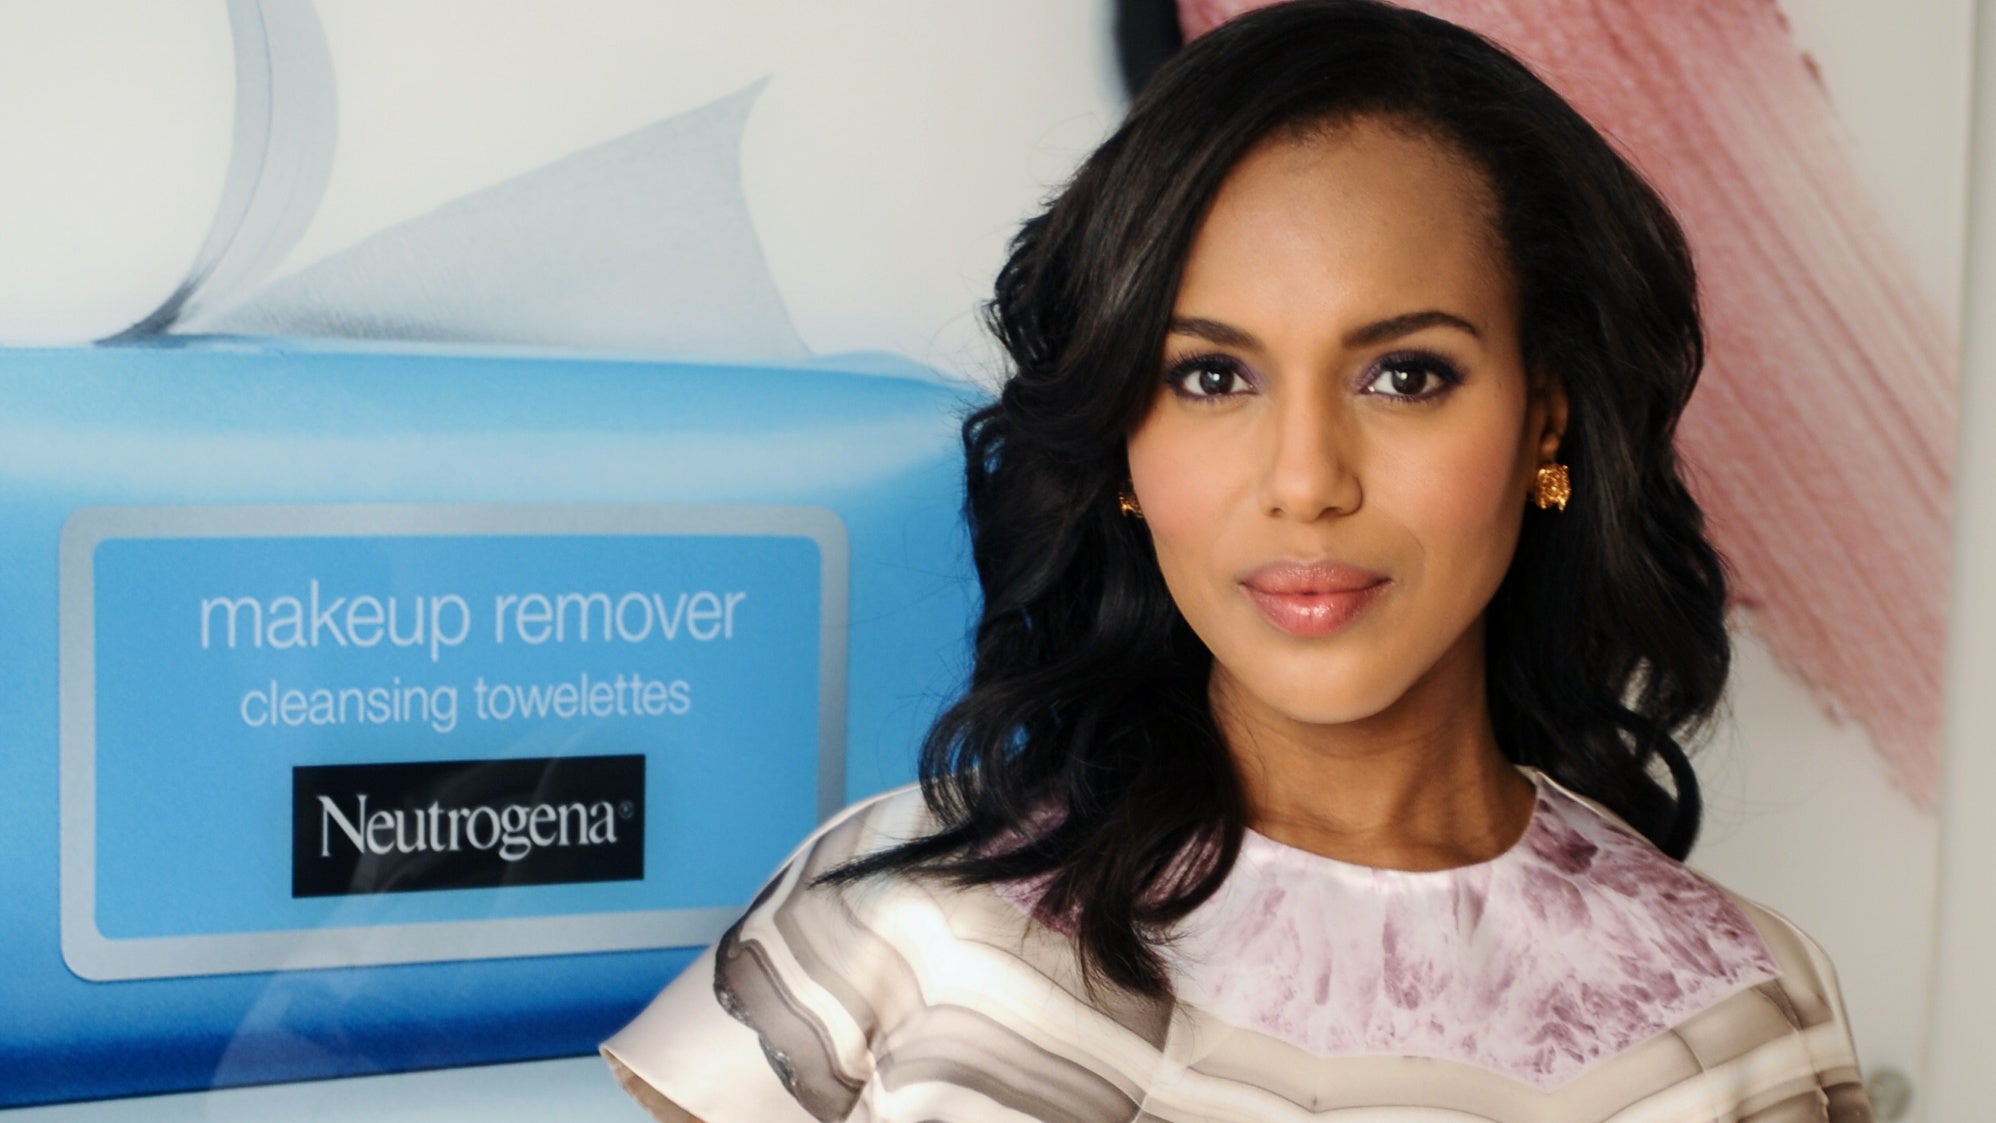 Kerry Washington On Her Skincare Routine As A Form Of Self-Care: "It Makes Me Feel So Good"